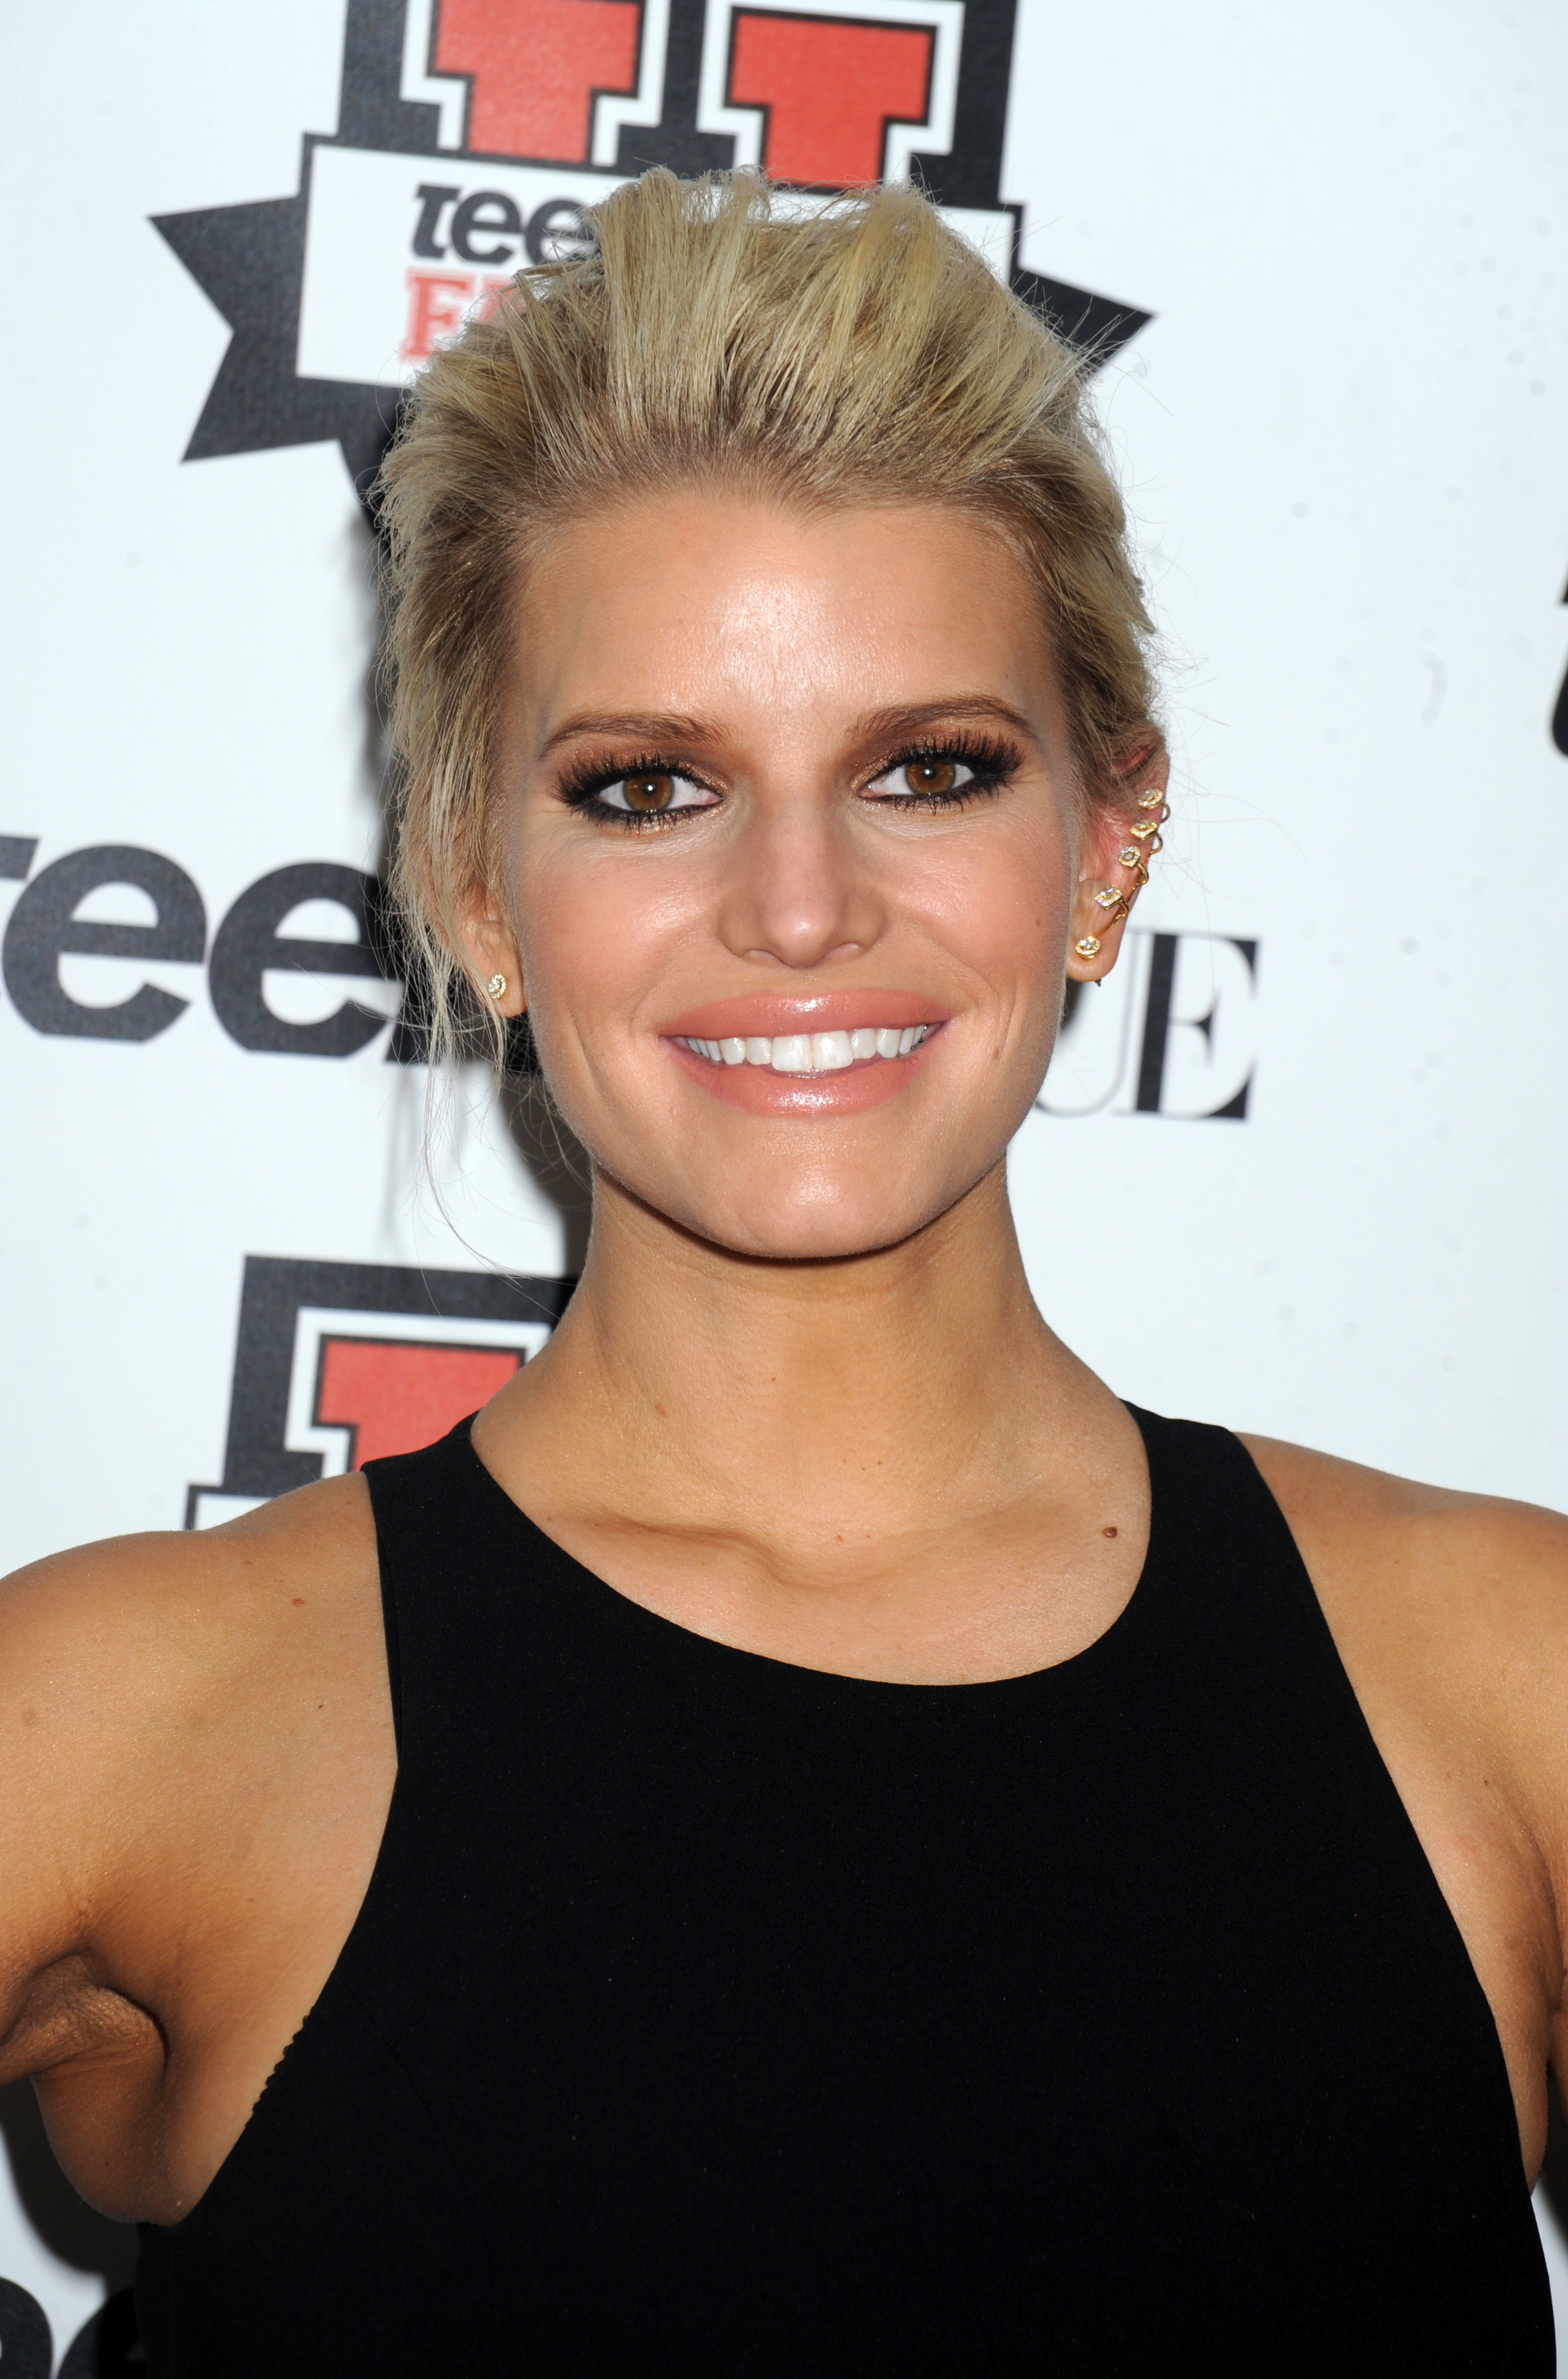 Jessica Simpson Goes Makeup Free — Puts Us All to Shame image